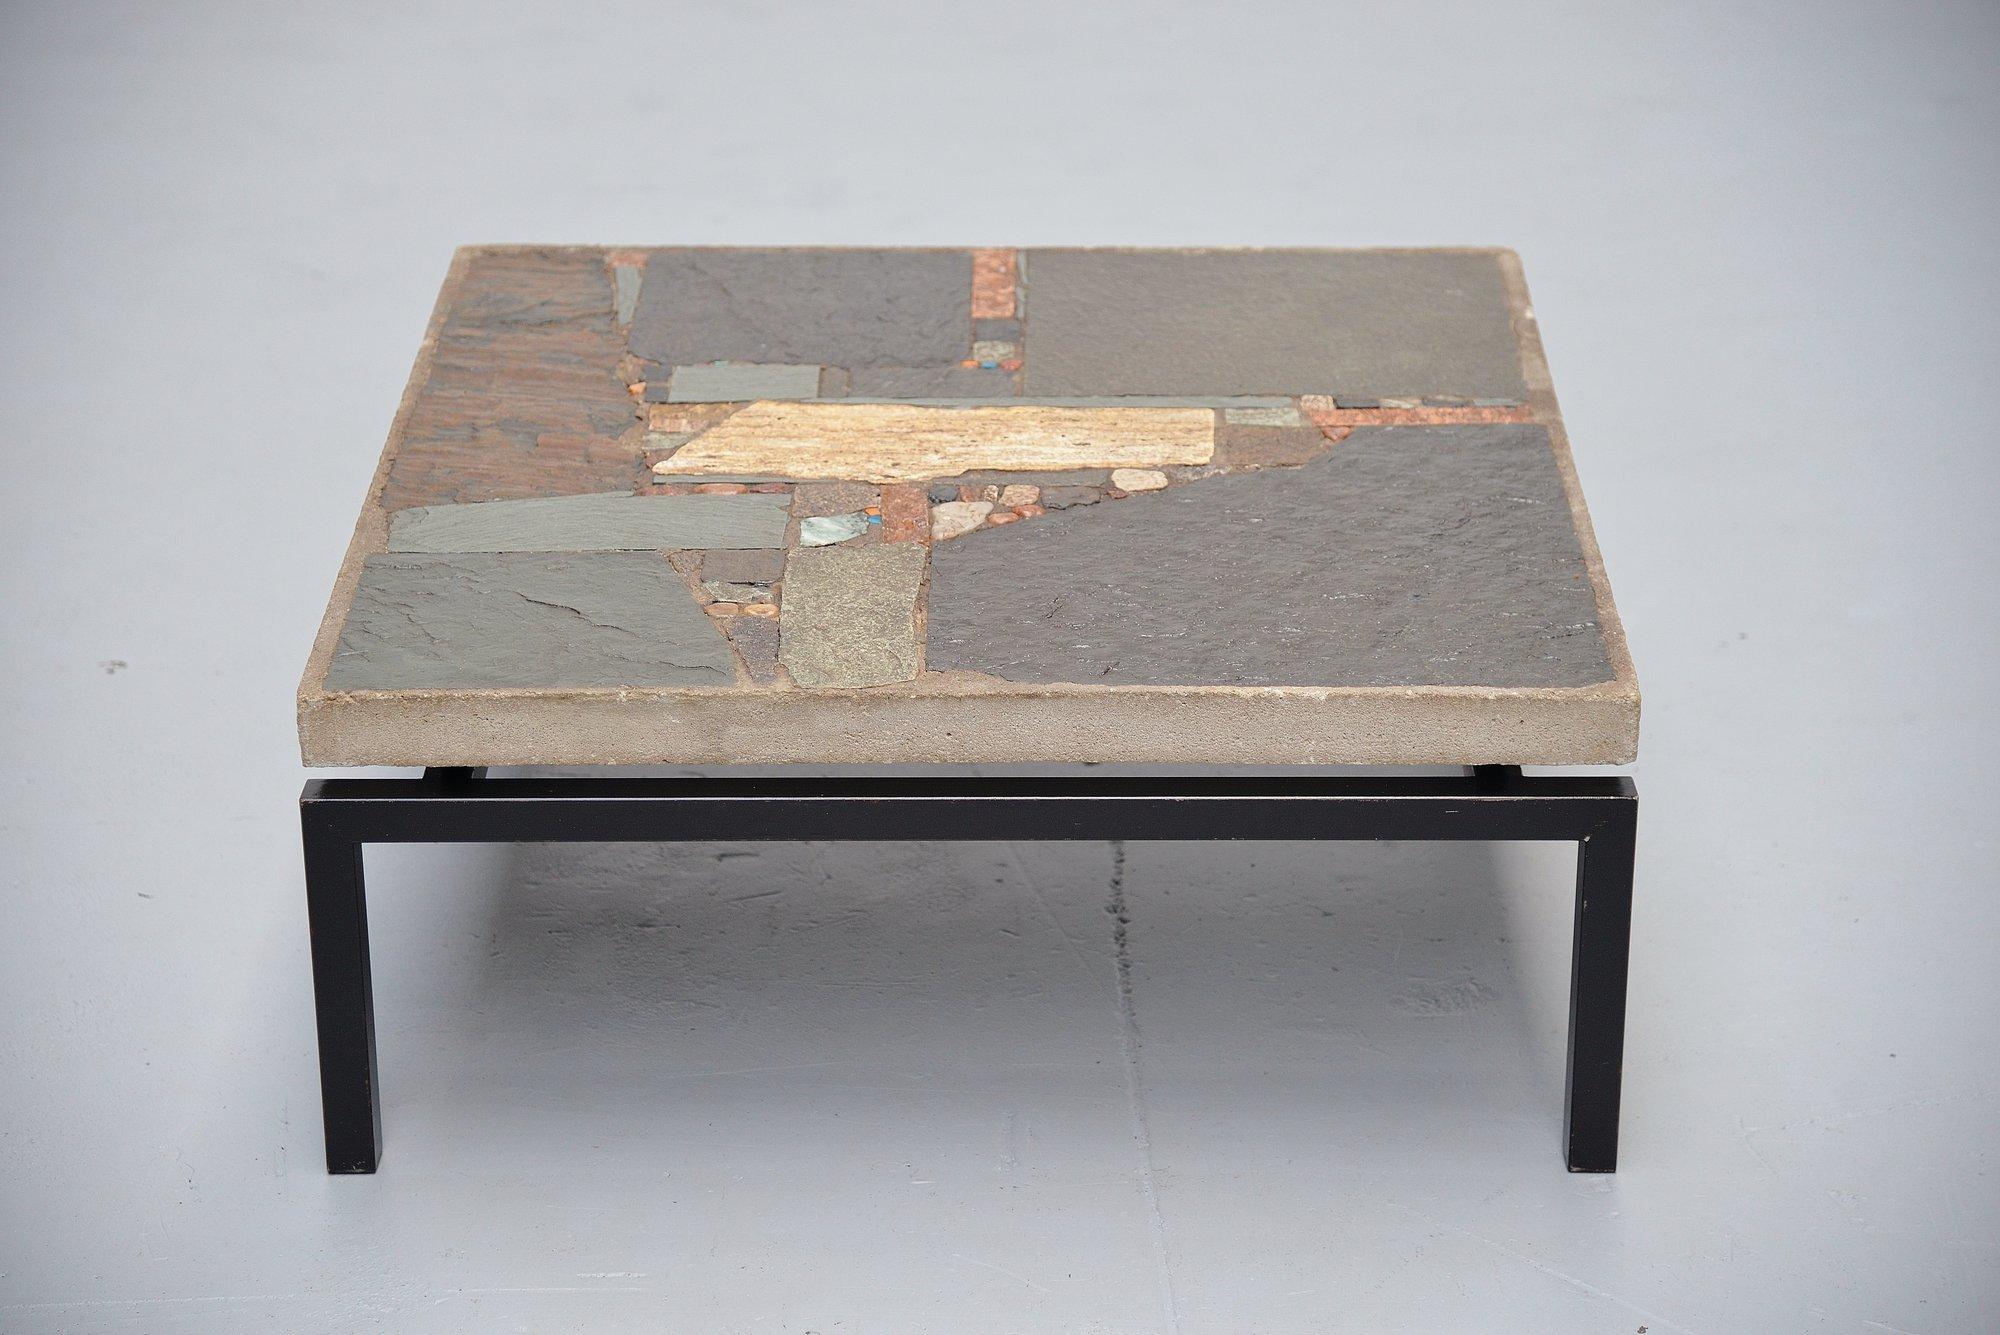 Rare and unique artwork coffee table designed and made by Rien Goené, Utrecht 1959. Rien Goene was a Dutch artist, painter and sculptor who inspired his work on the Cobra movement that was founded in 1948. He started making tables together with Paul